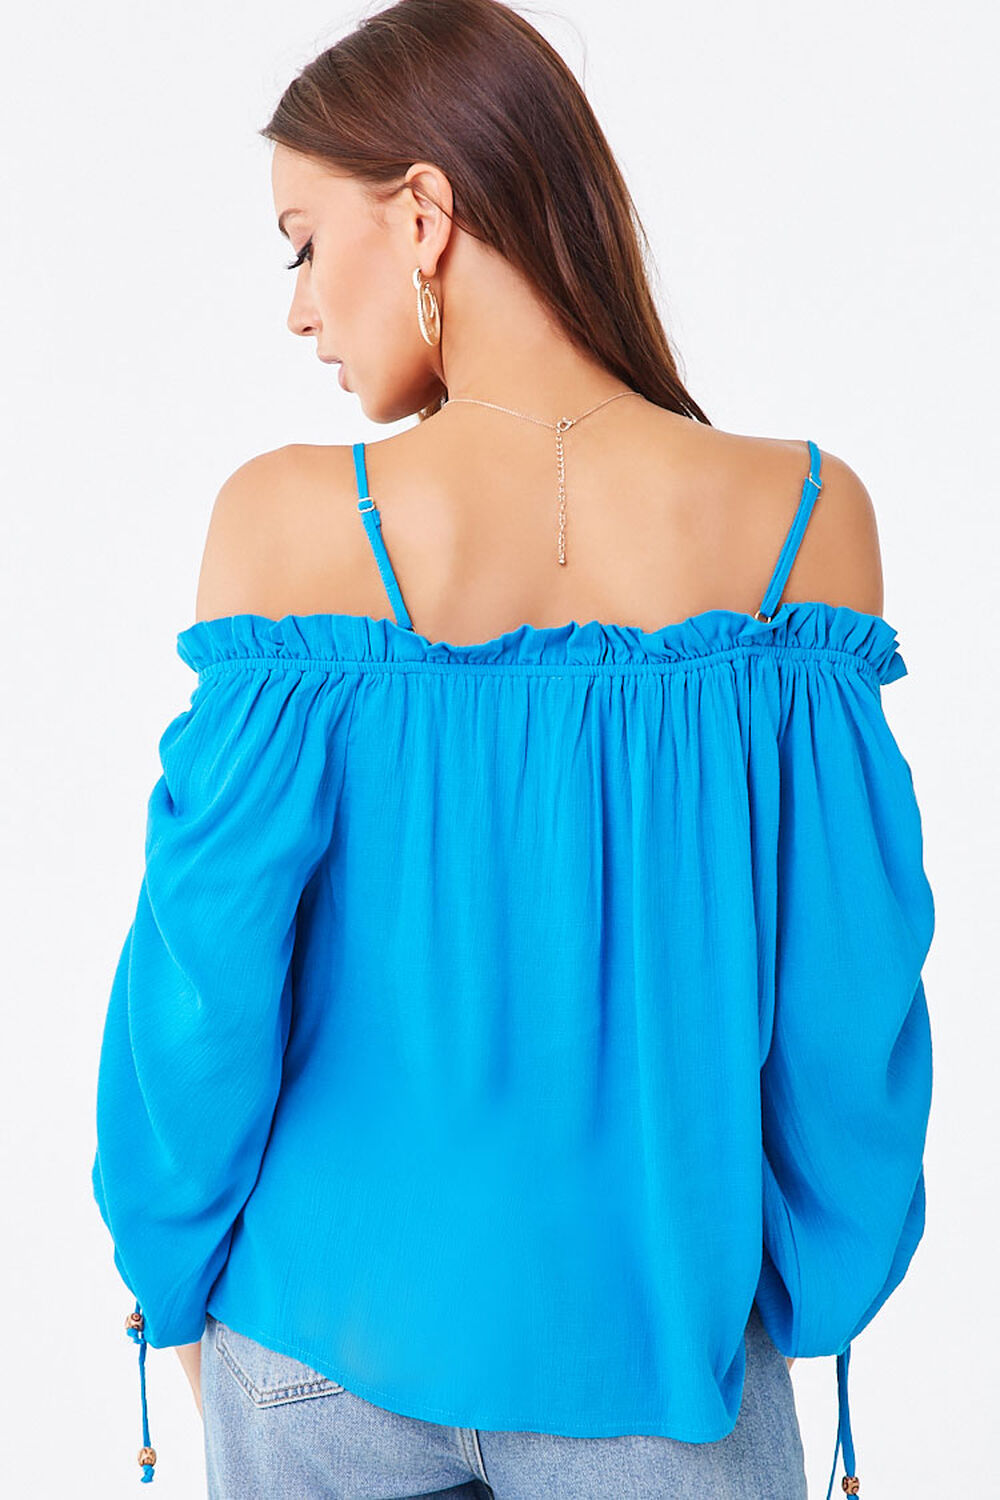 TURQUOISE Ruffled Open-Shoulder Top, image 3